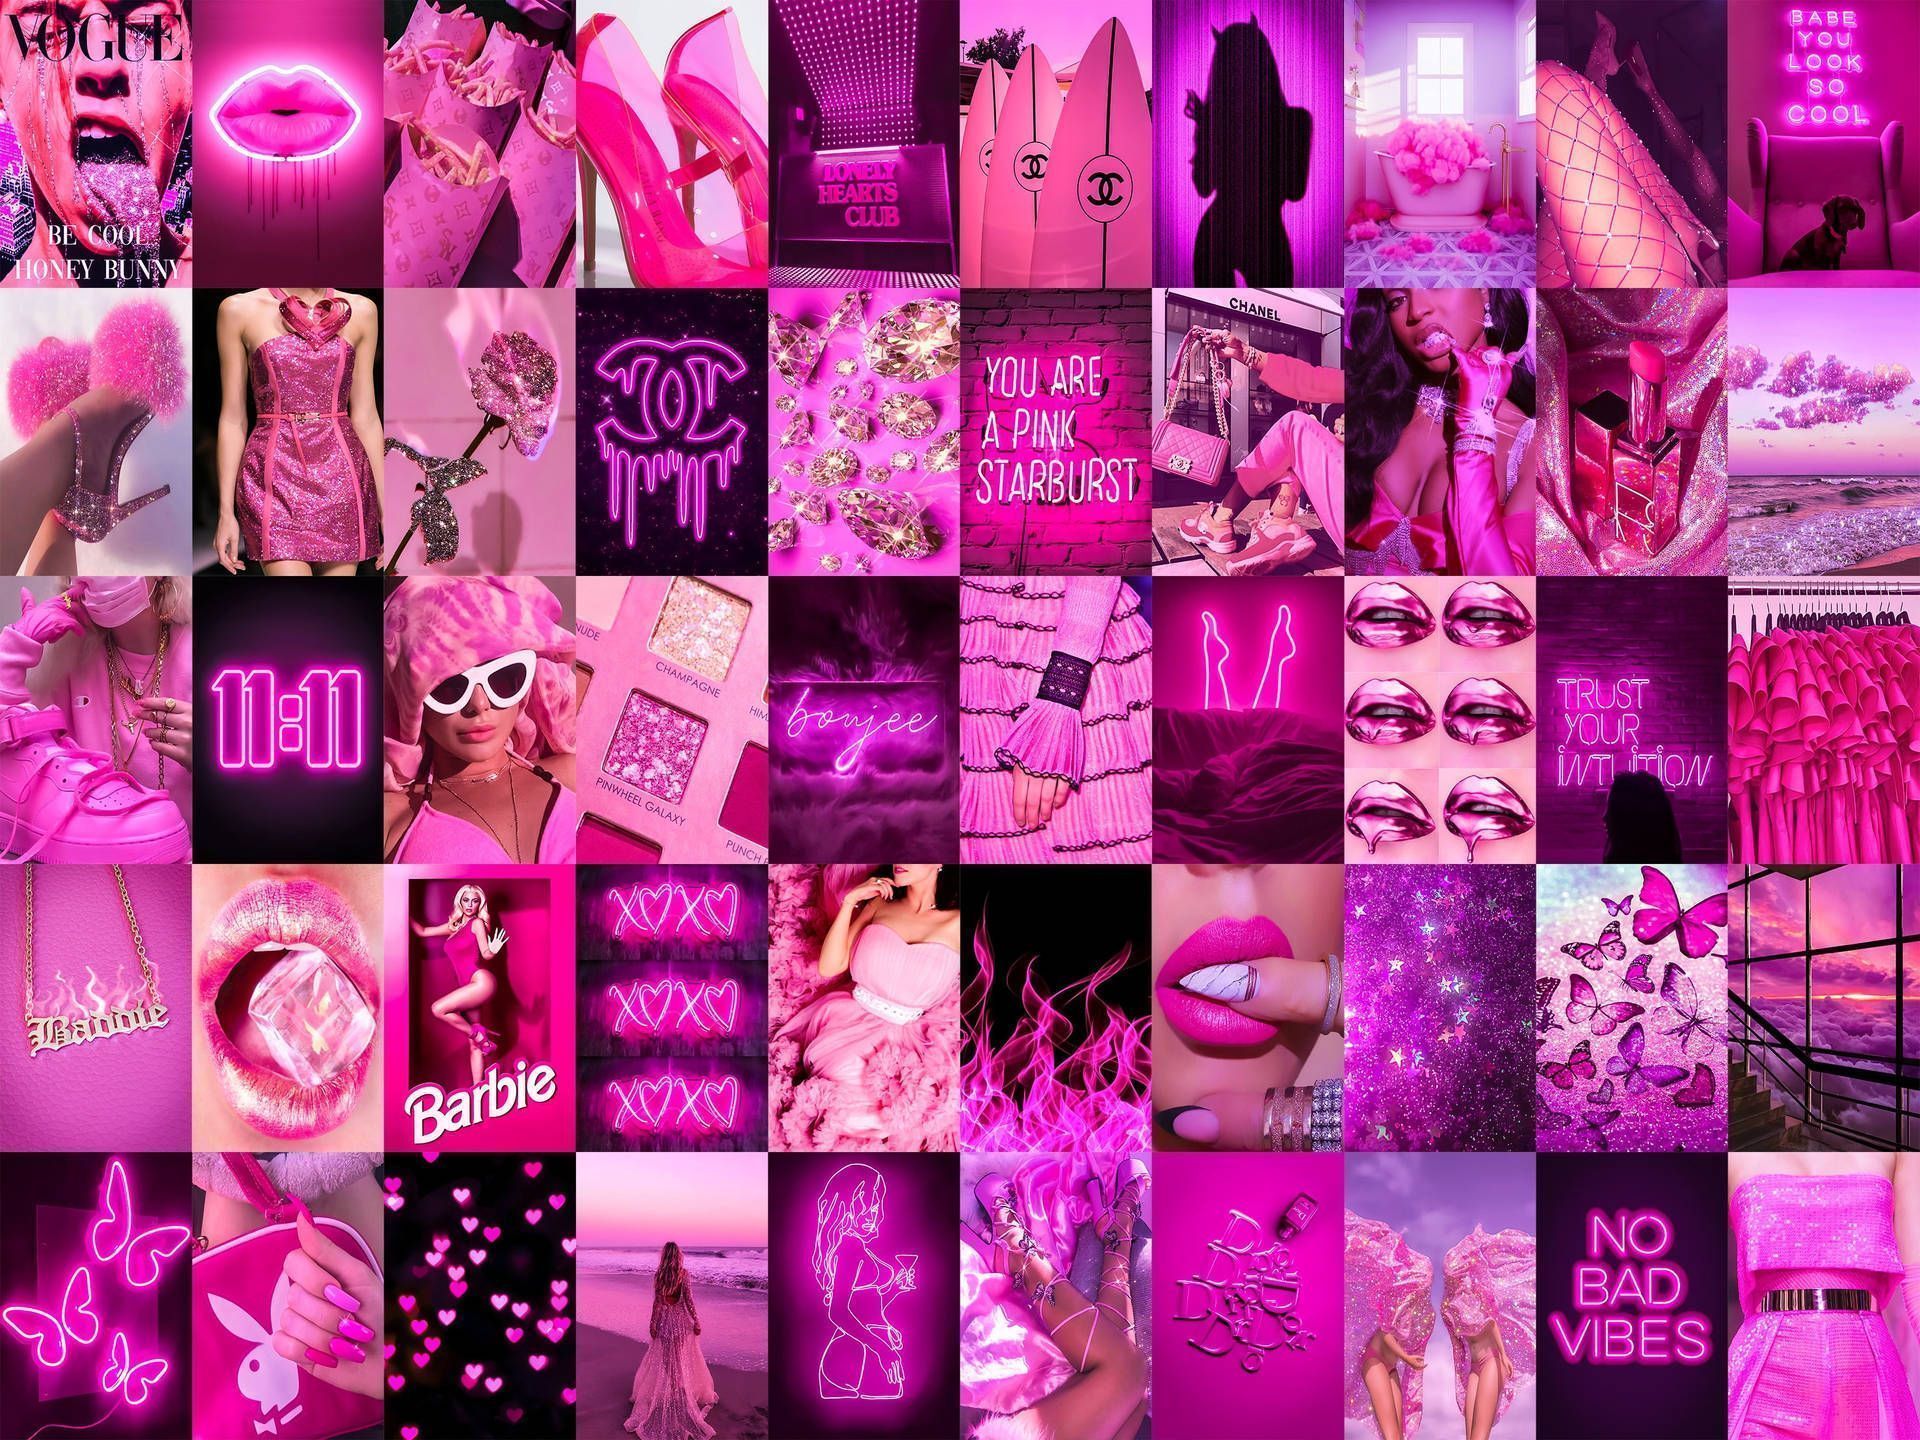 Aesthetic collage of pink and purple images including fashion, barbie, and makeup. - Barbie